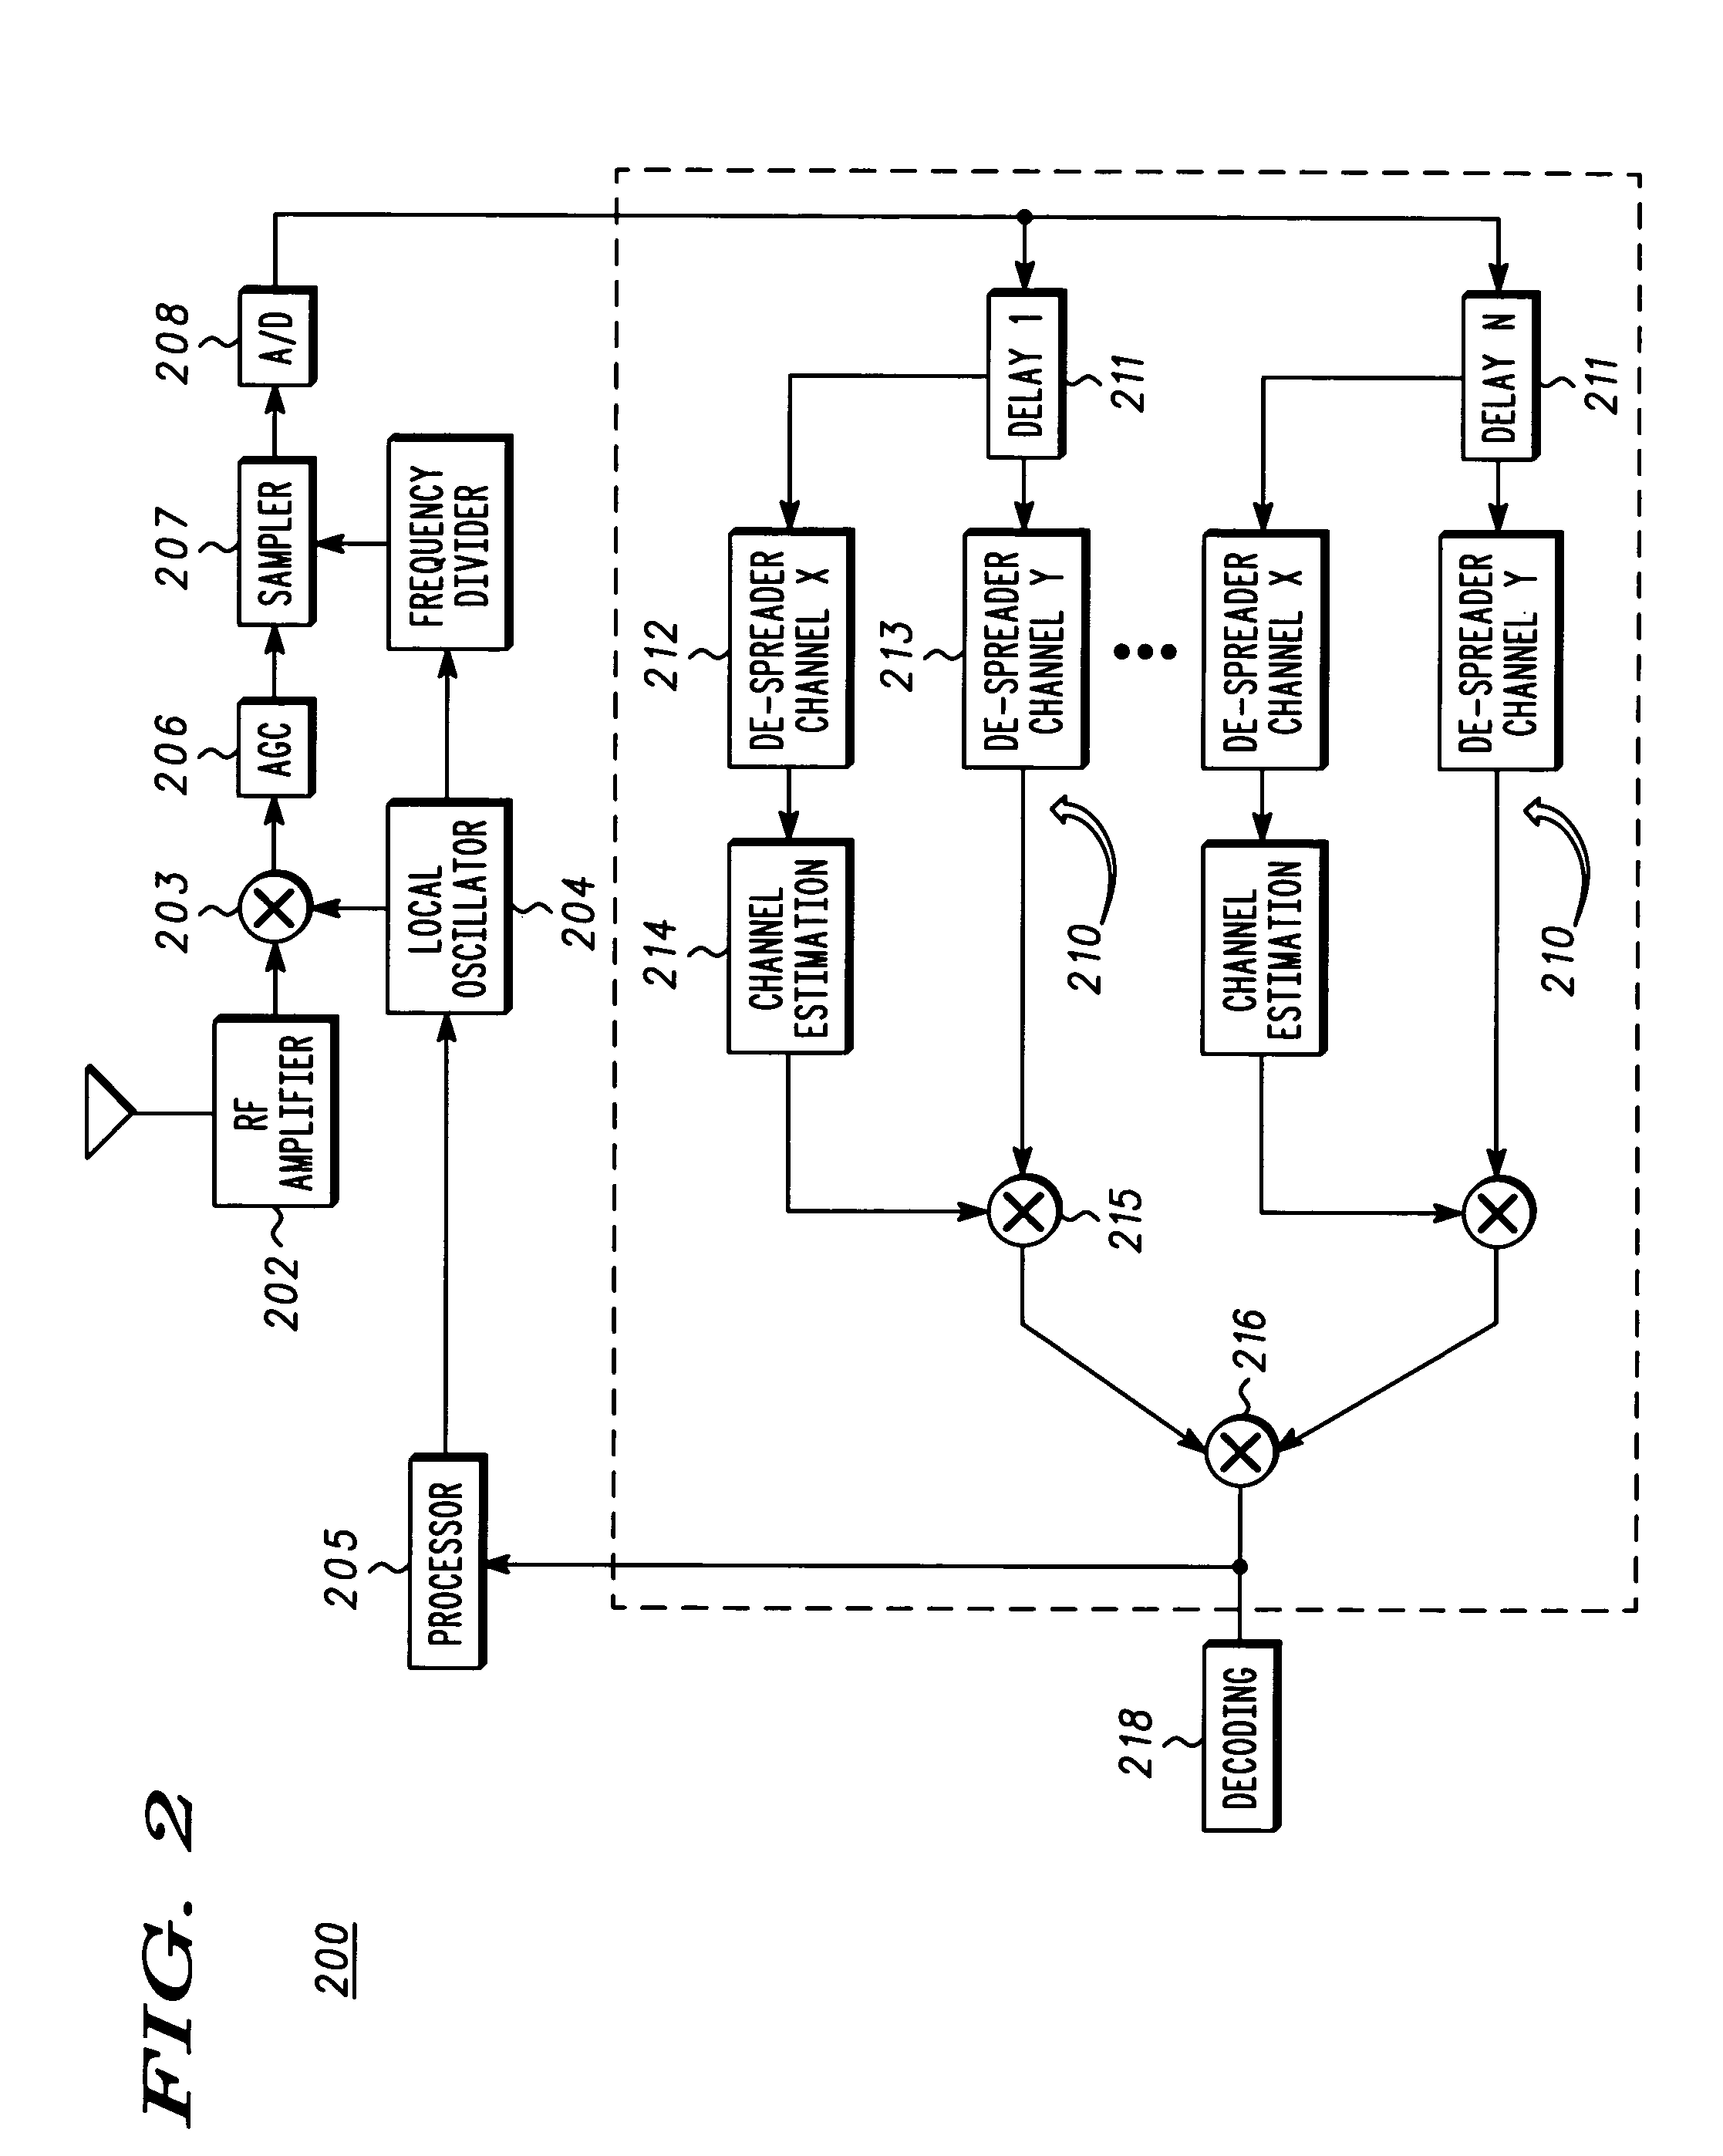 Downlink power control in wireless communications networks and methods